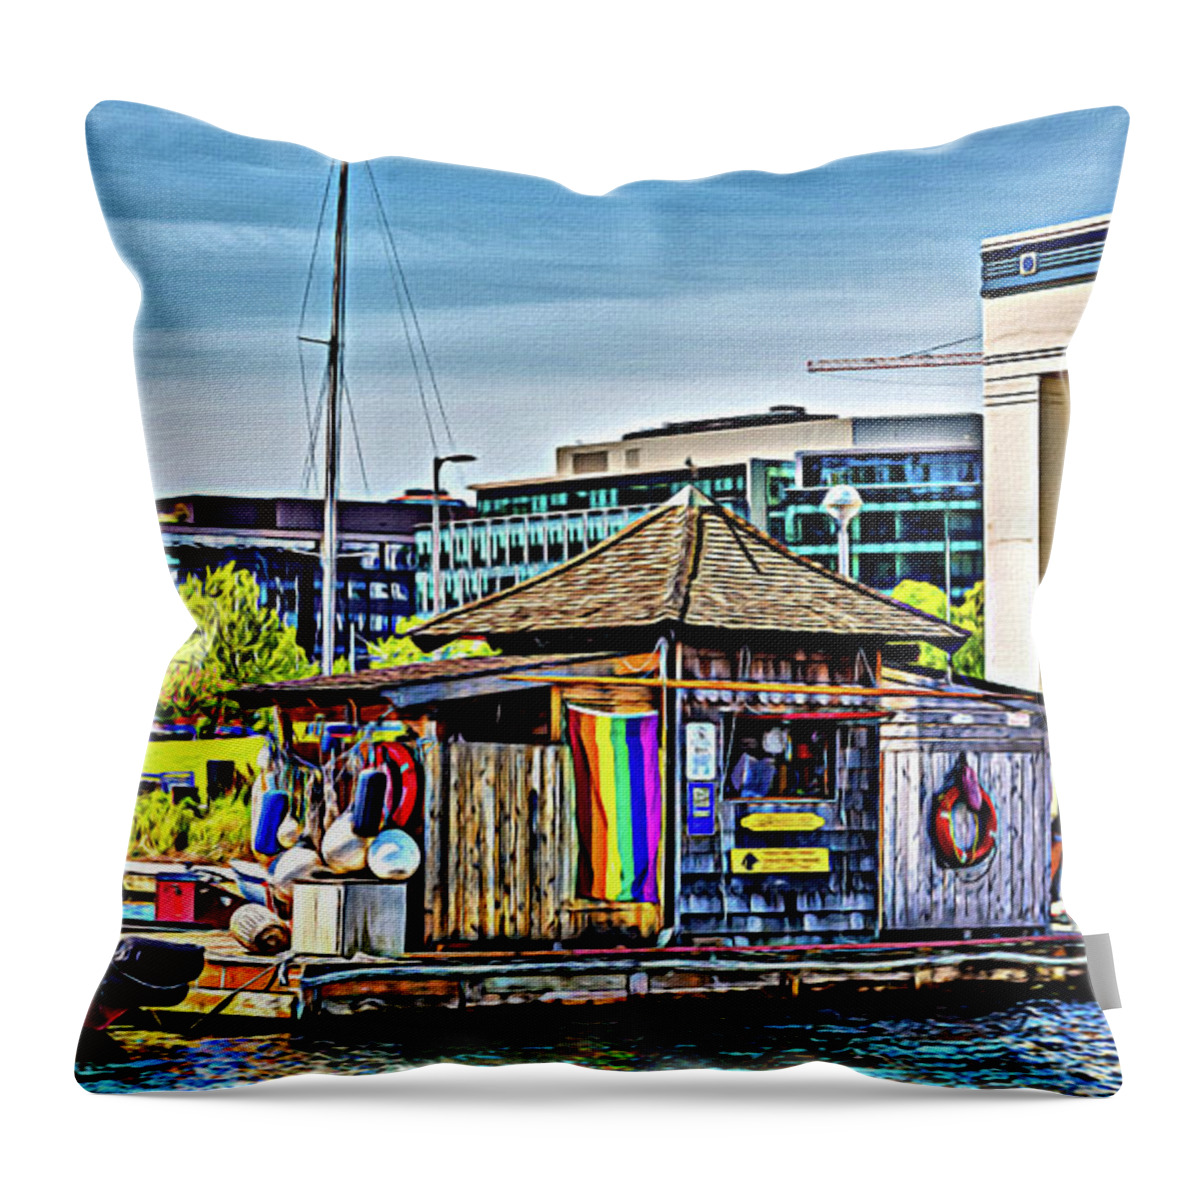 Center For Wooden Boats Throw Pillow featuring the photograph Oarhouse at Center for Wooden Boats by Darryl Brooks